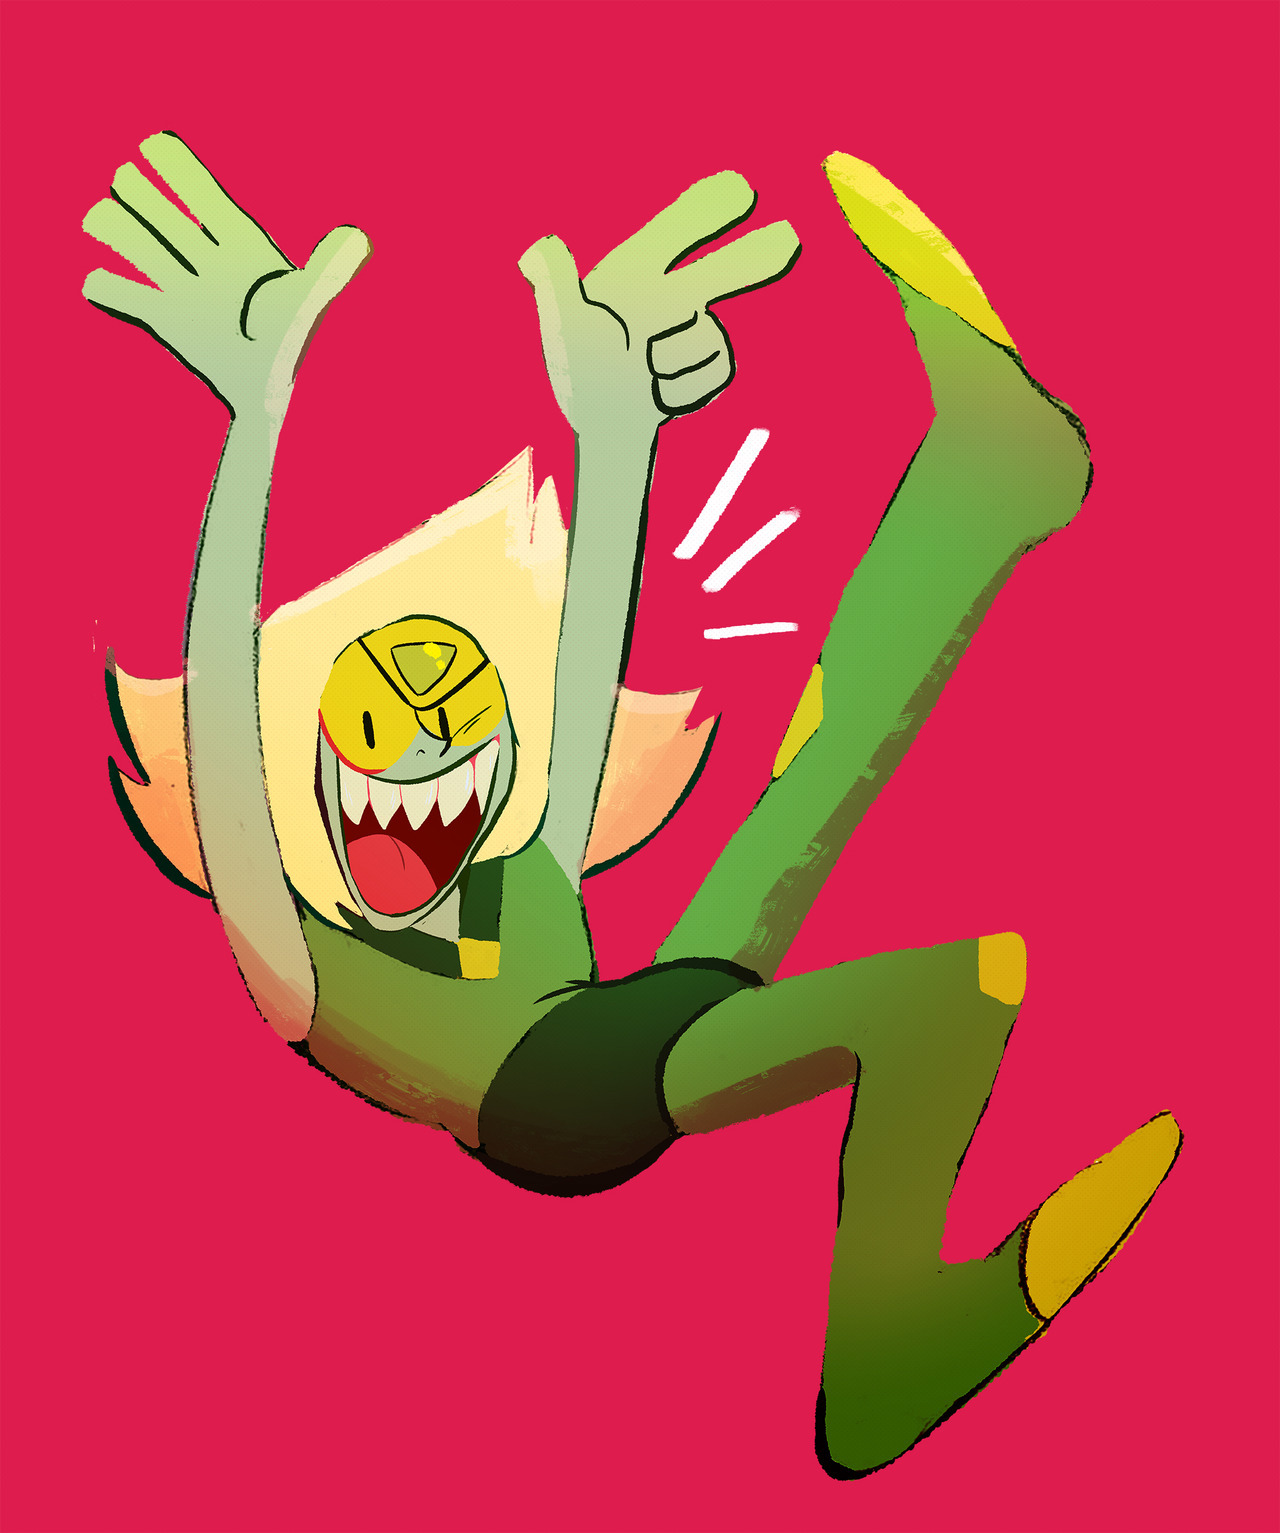 i got peridot on the official SU quiz